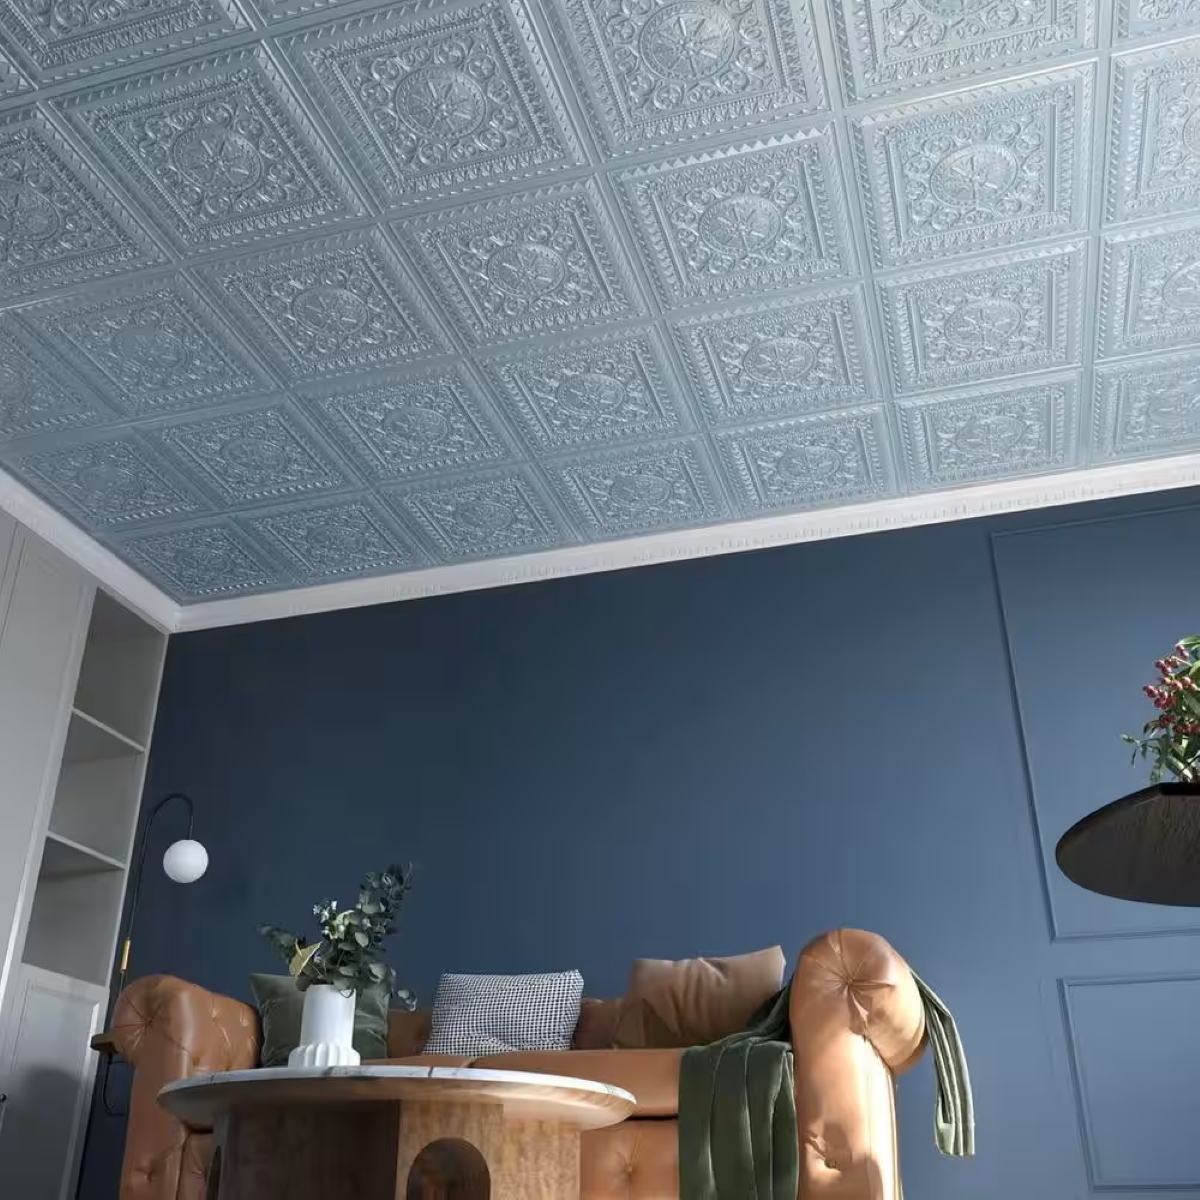 Decorative dropped ceiling